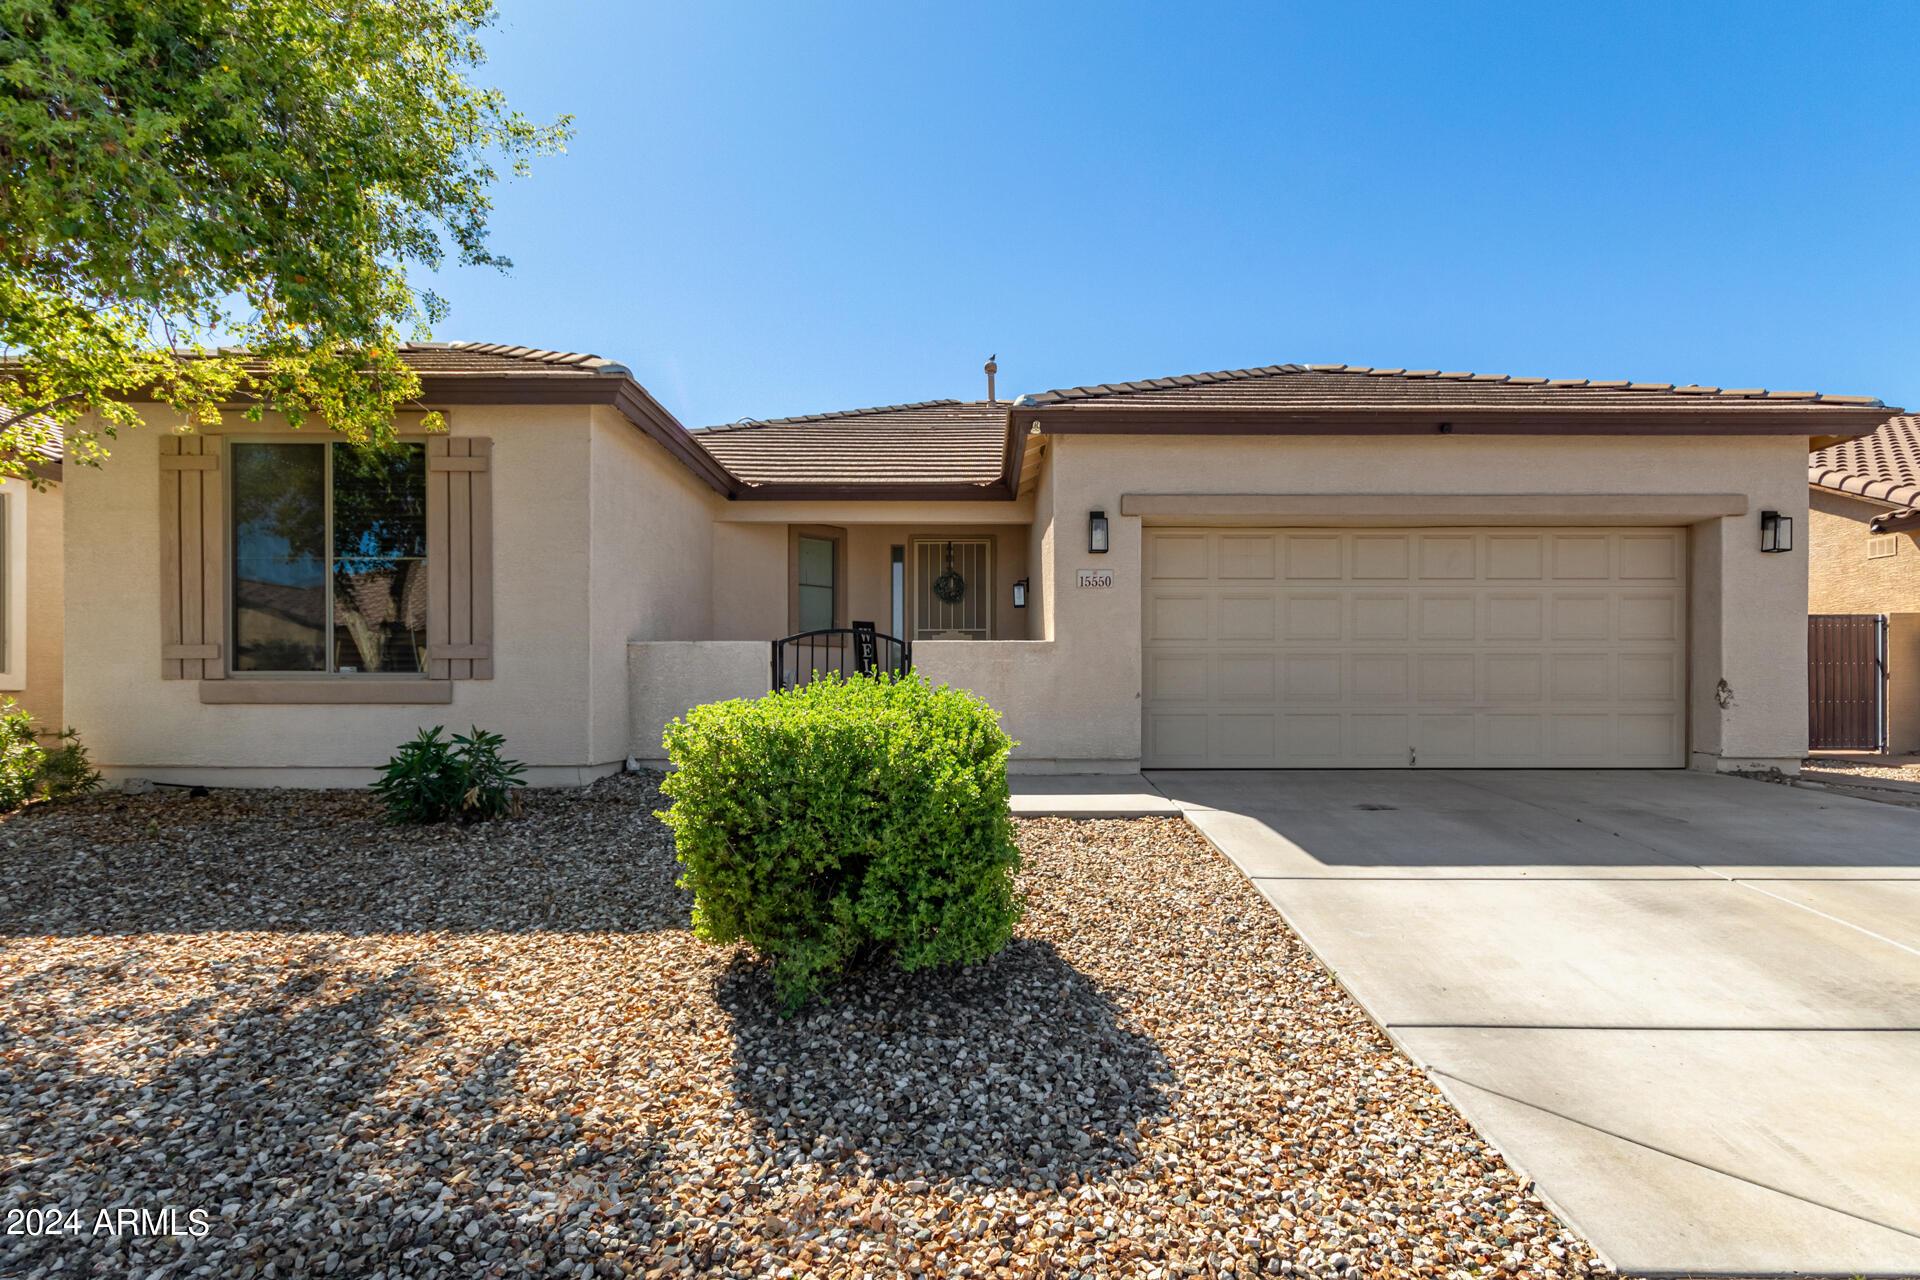 Photo one of 15550 N 181St Ave Surprise AZ 85388 | MLS 6687759